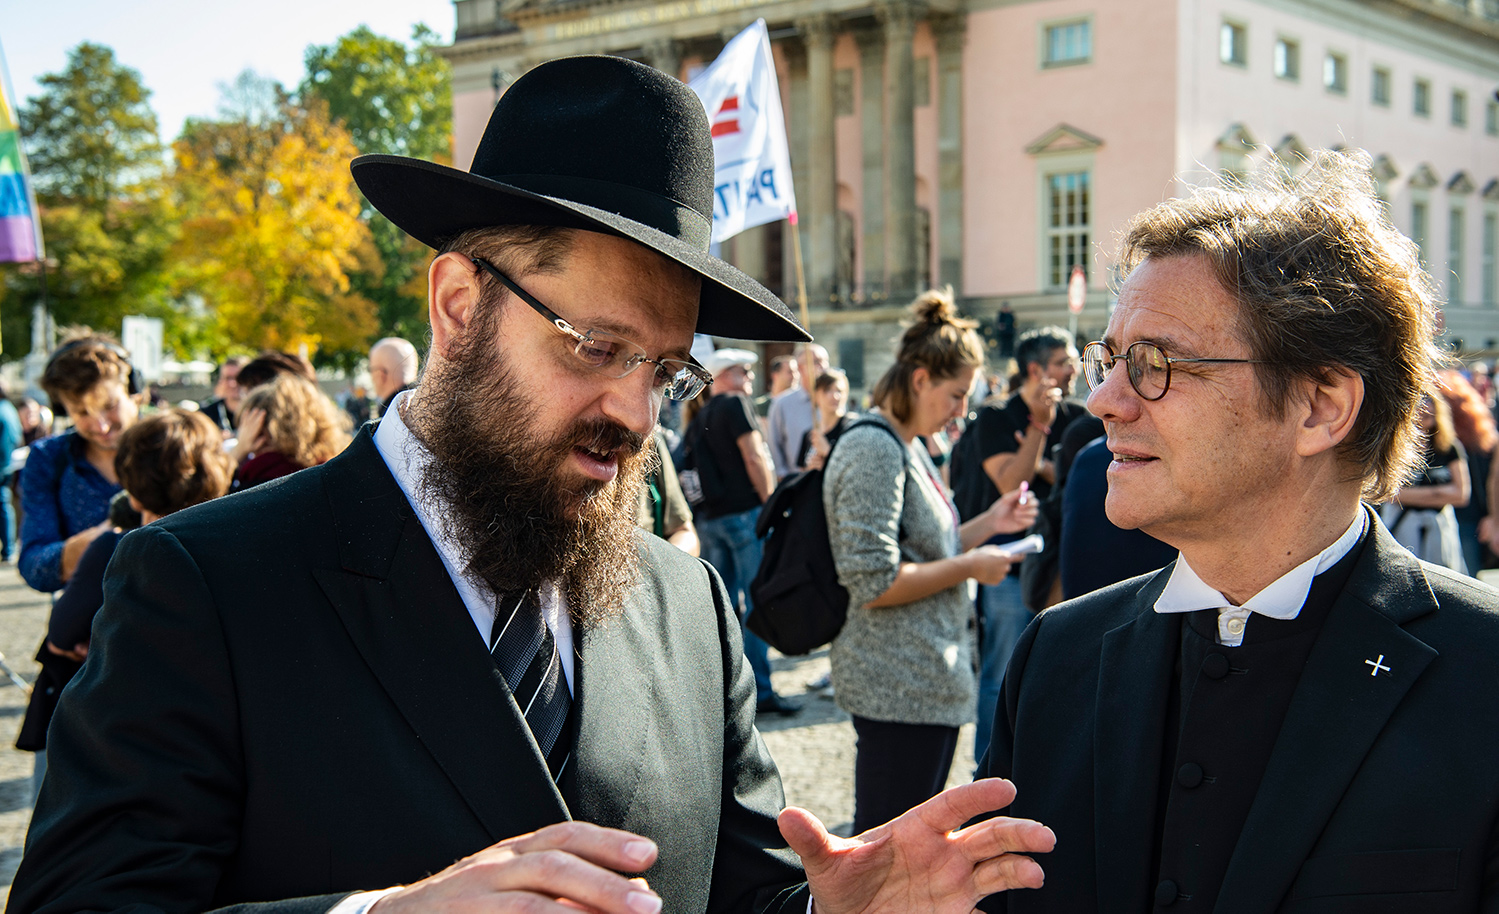 Yehuda Teichtal, left, of the Jewish community in Berlin, and Markus Dröge, bishop of the Protestant church in Berlin, at a demonstration against anti-Semitism in 2019. Paul Zinken/picture alliance via Getty Images.
